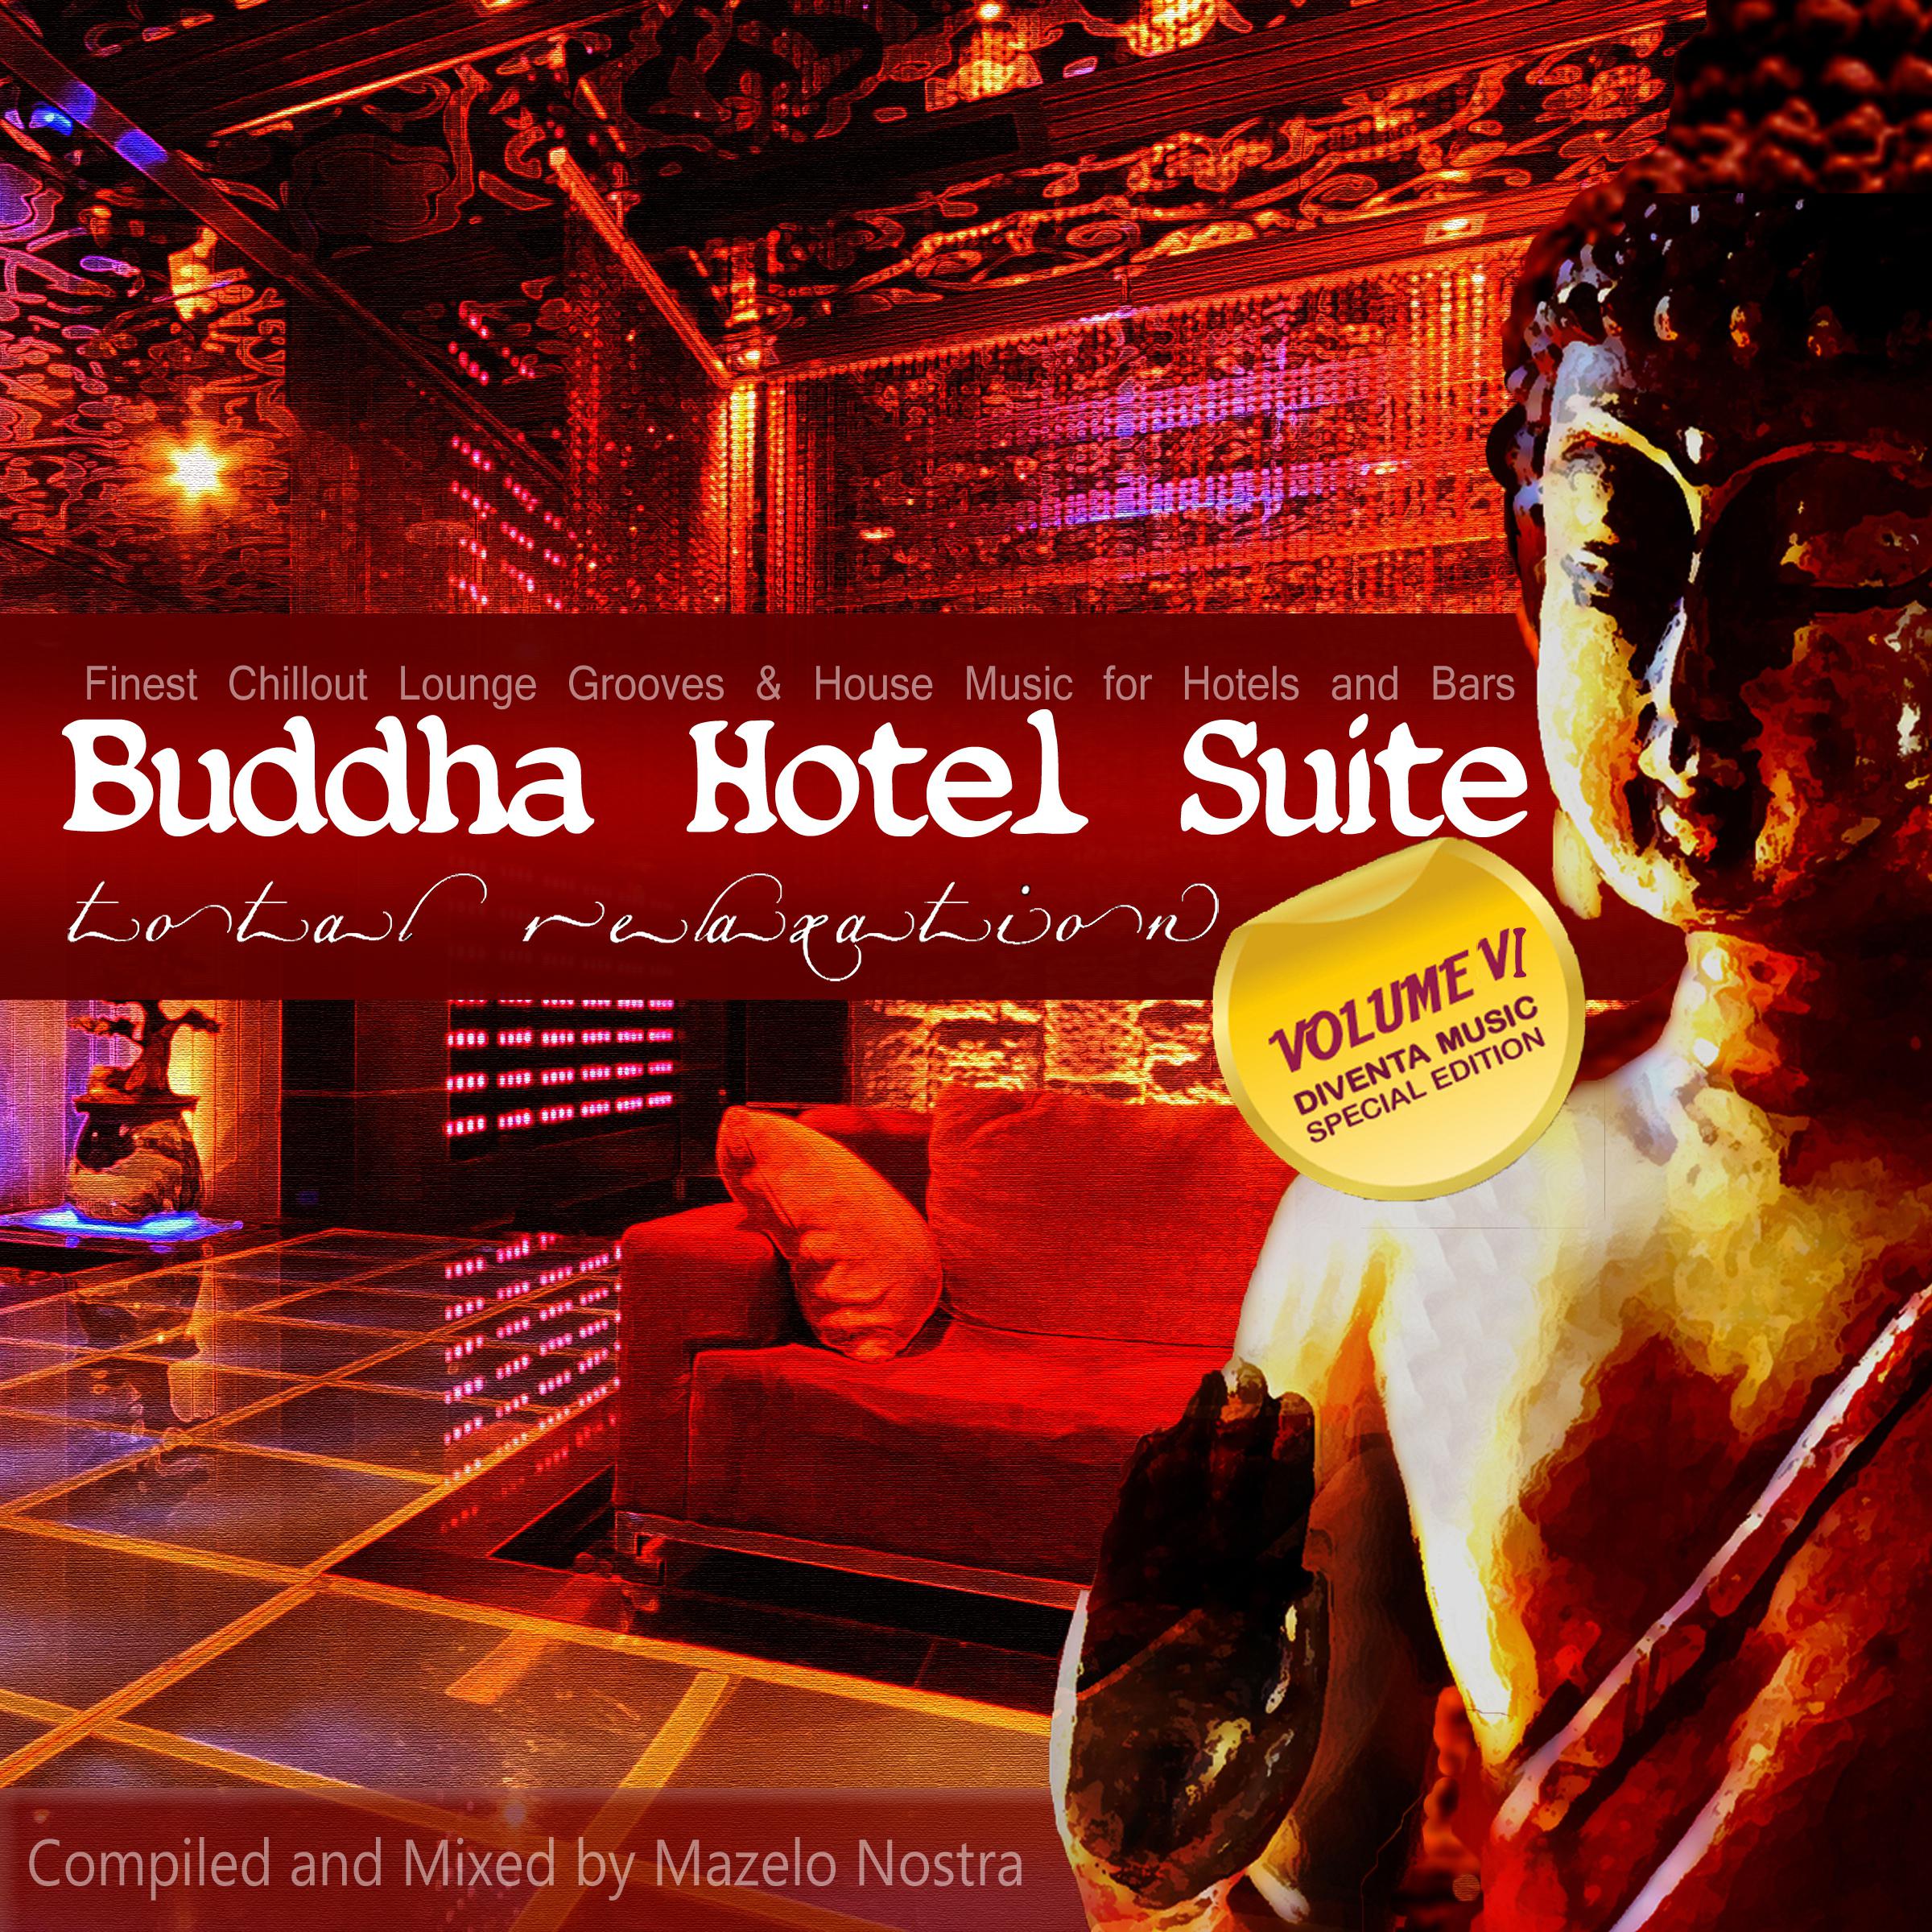 Buddha Hotel Suite VI (Finest Chillout Lounge Grooves & House Music for Hotels & Bars)